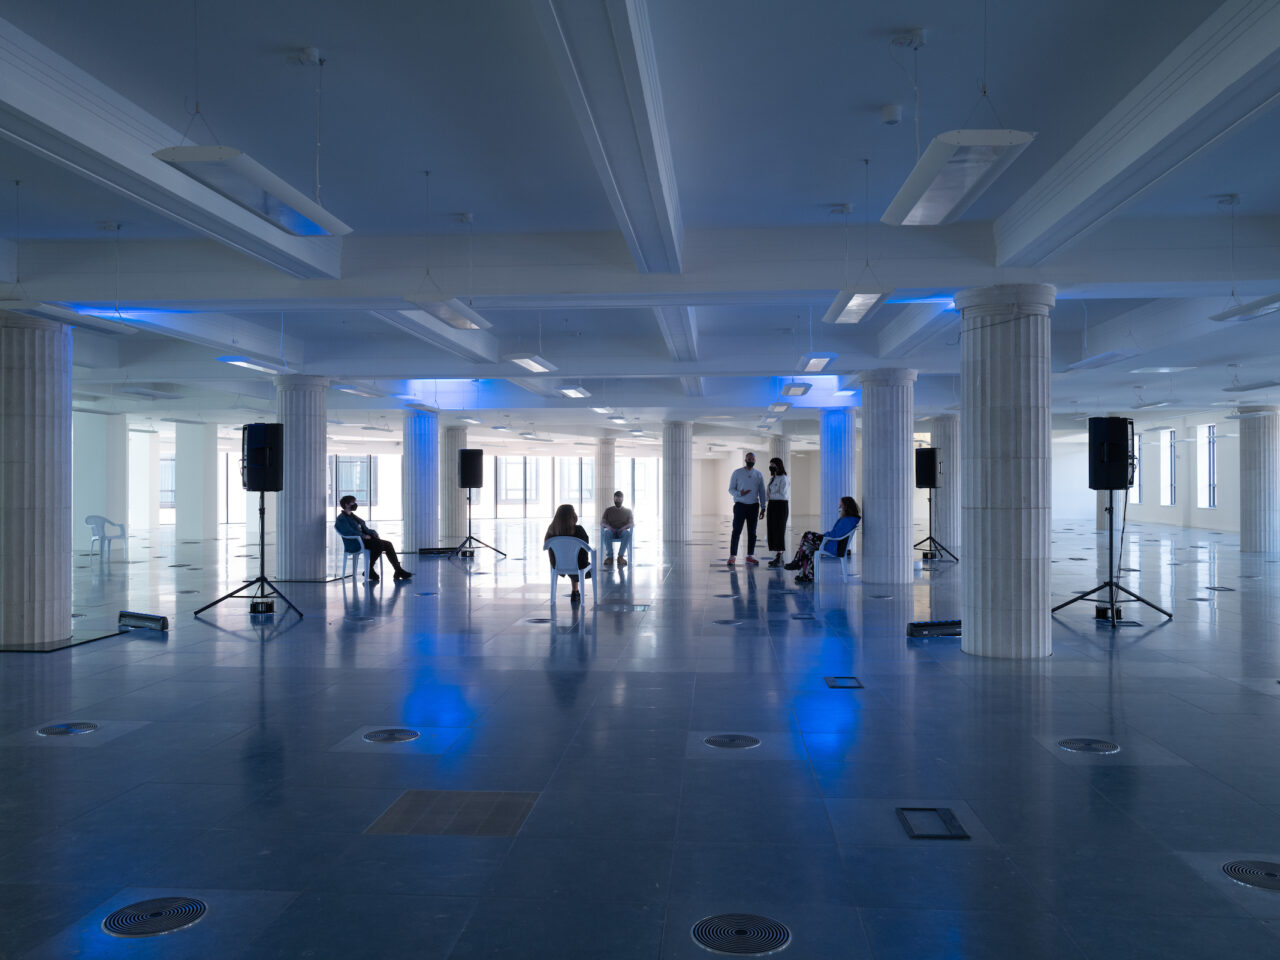 People in a large white room in the Lewis's Building with large white pillars throughout. In the middle of the room are speakers on stands all facing each other, the middle space is lit up with blue lighting and there is a sound piece playing.